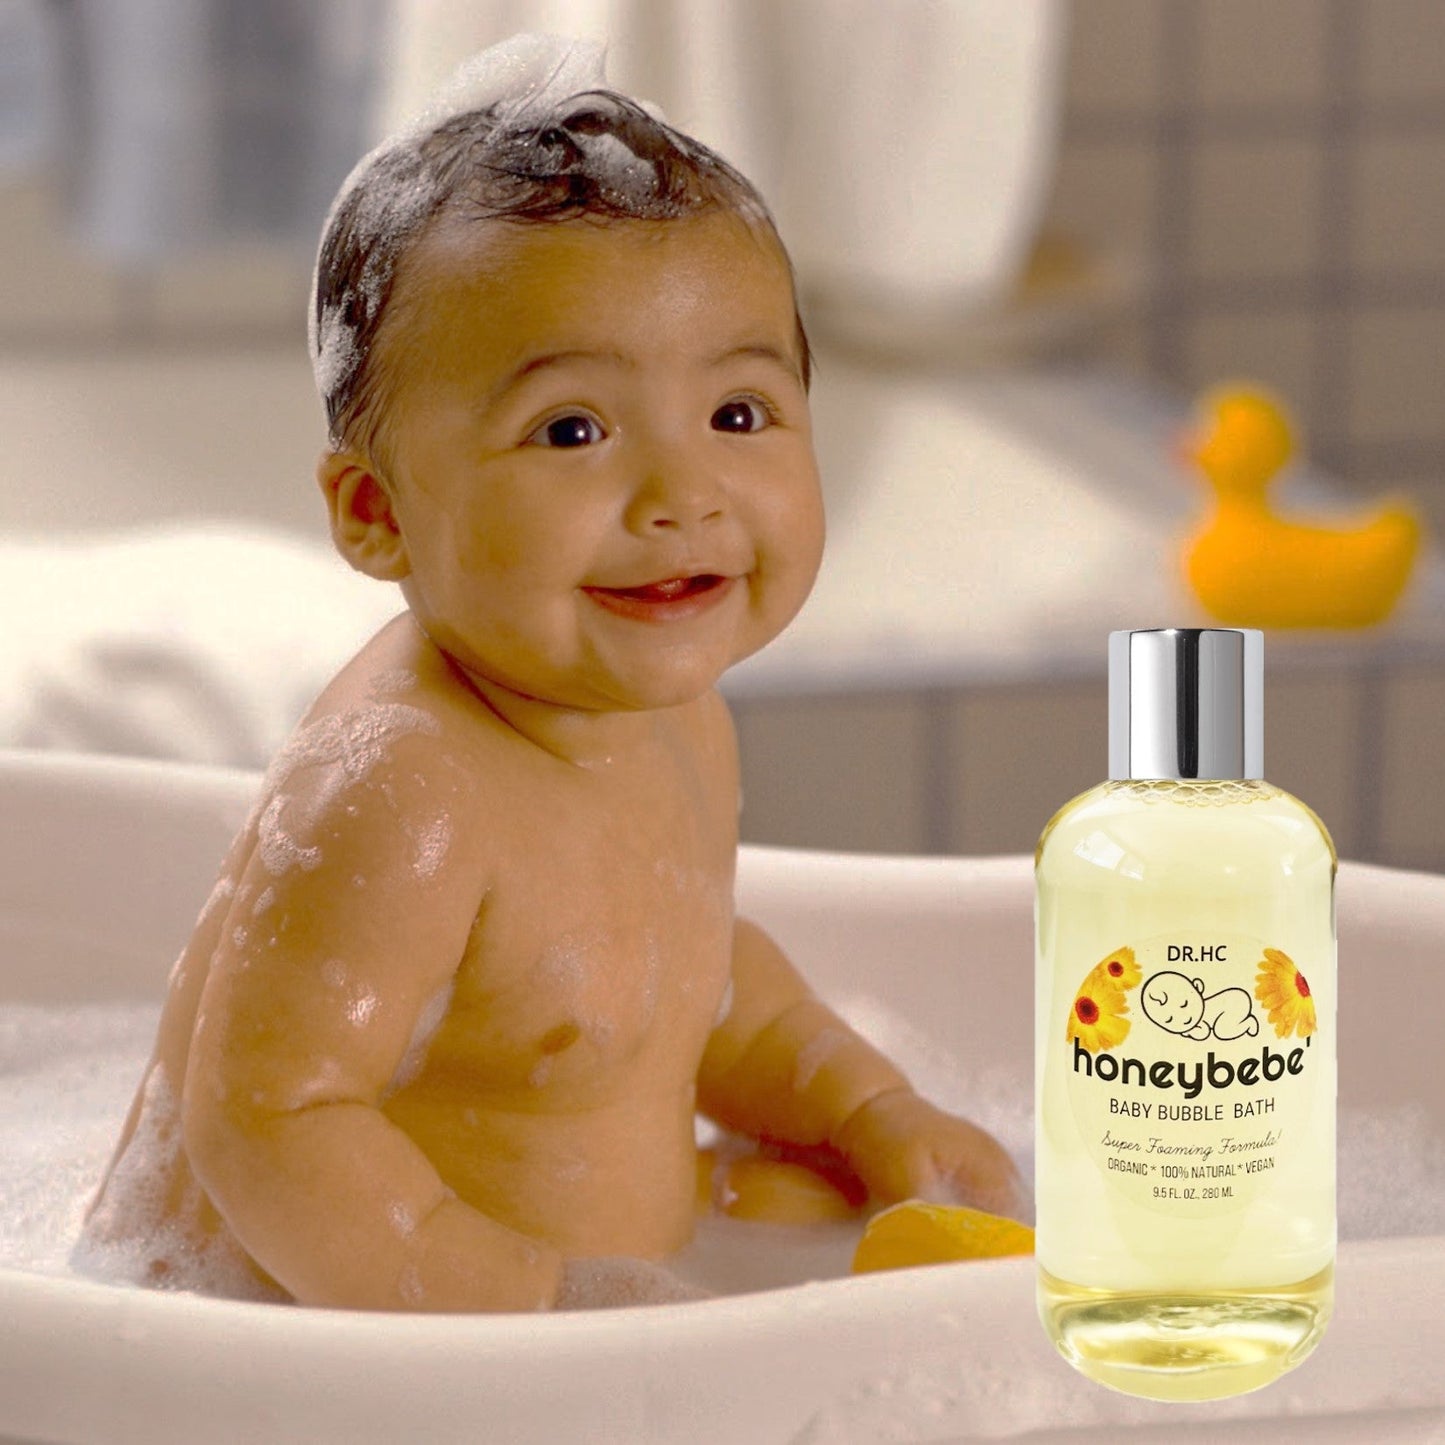 DR.HC Honeybebe' Organic & All-Natural Baby Bubble Bath (Refreshing Patchouli) - For Baby & Mommy (9.5 fl.oz., 280 ml)